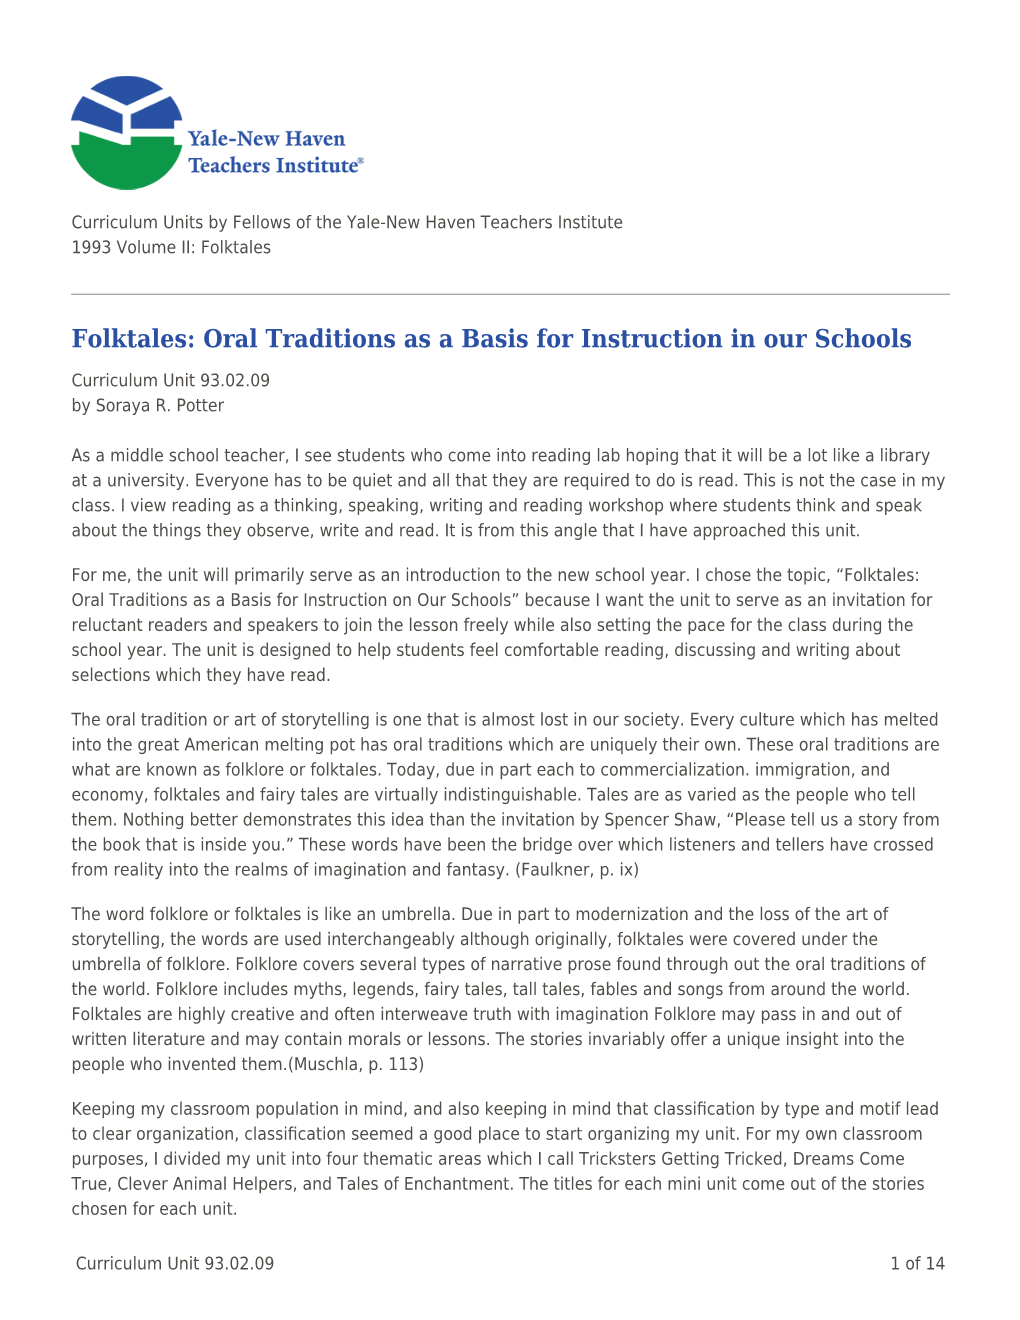 Folktales: Oral Traditions As a Basis for Instruction in Our Schools